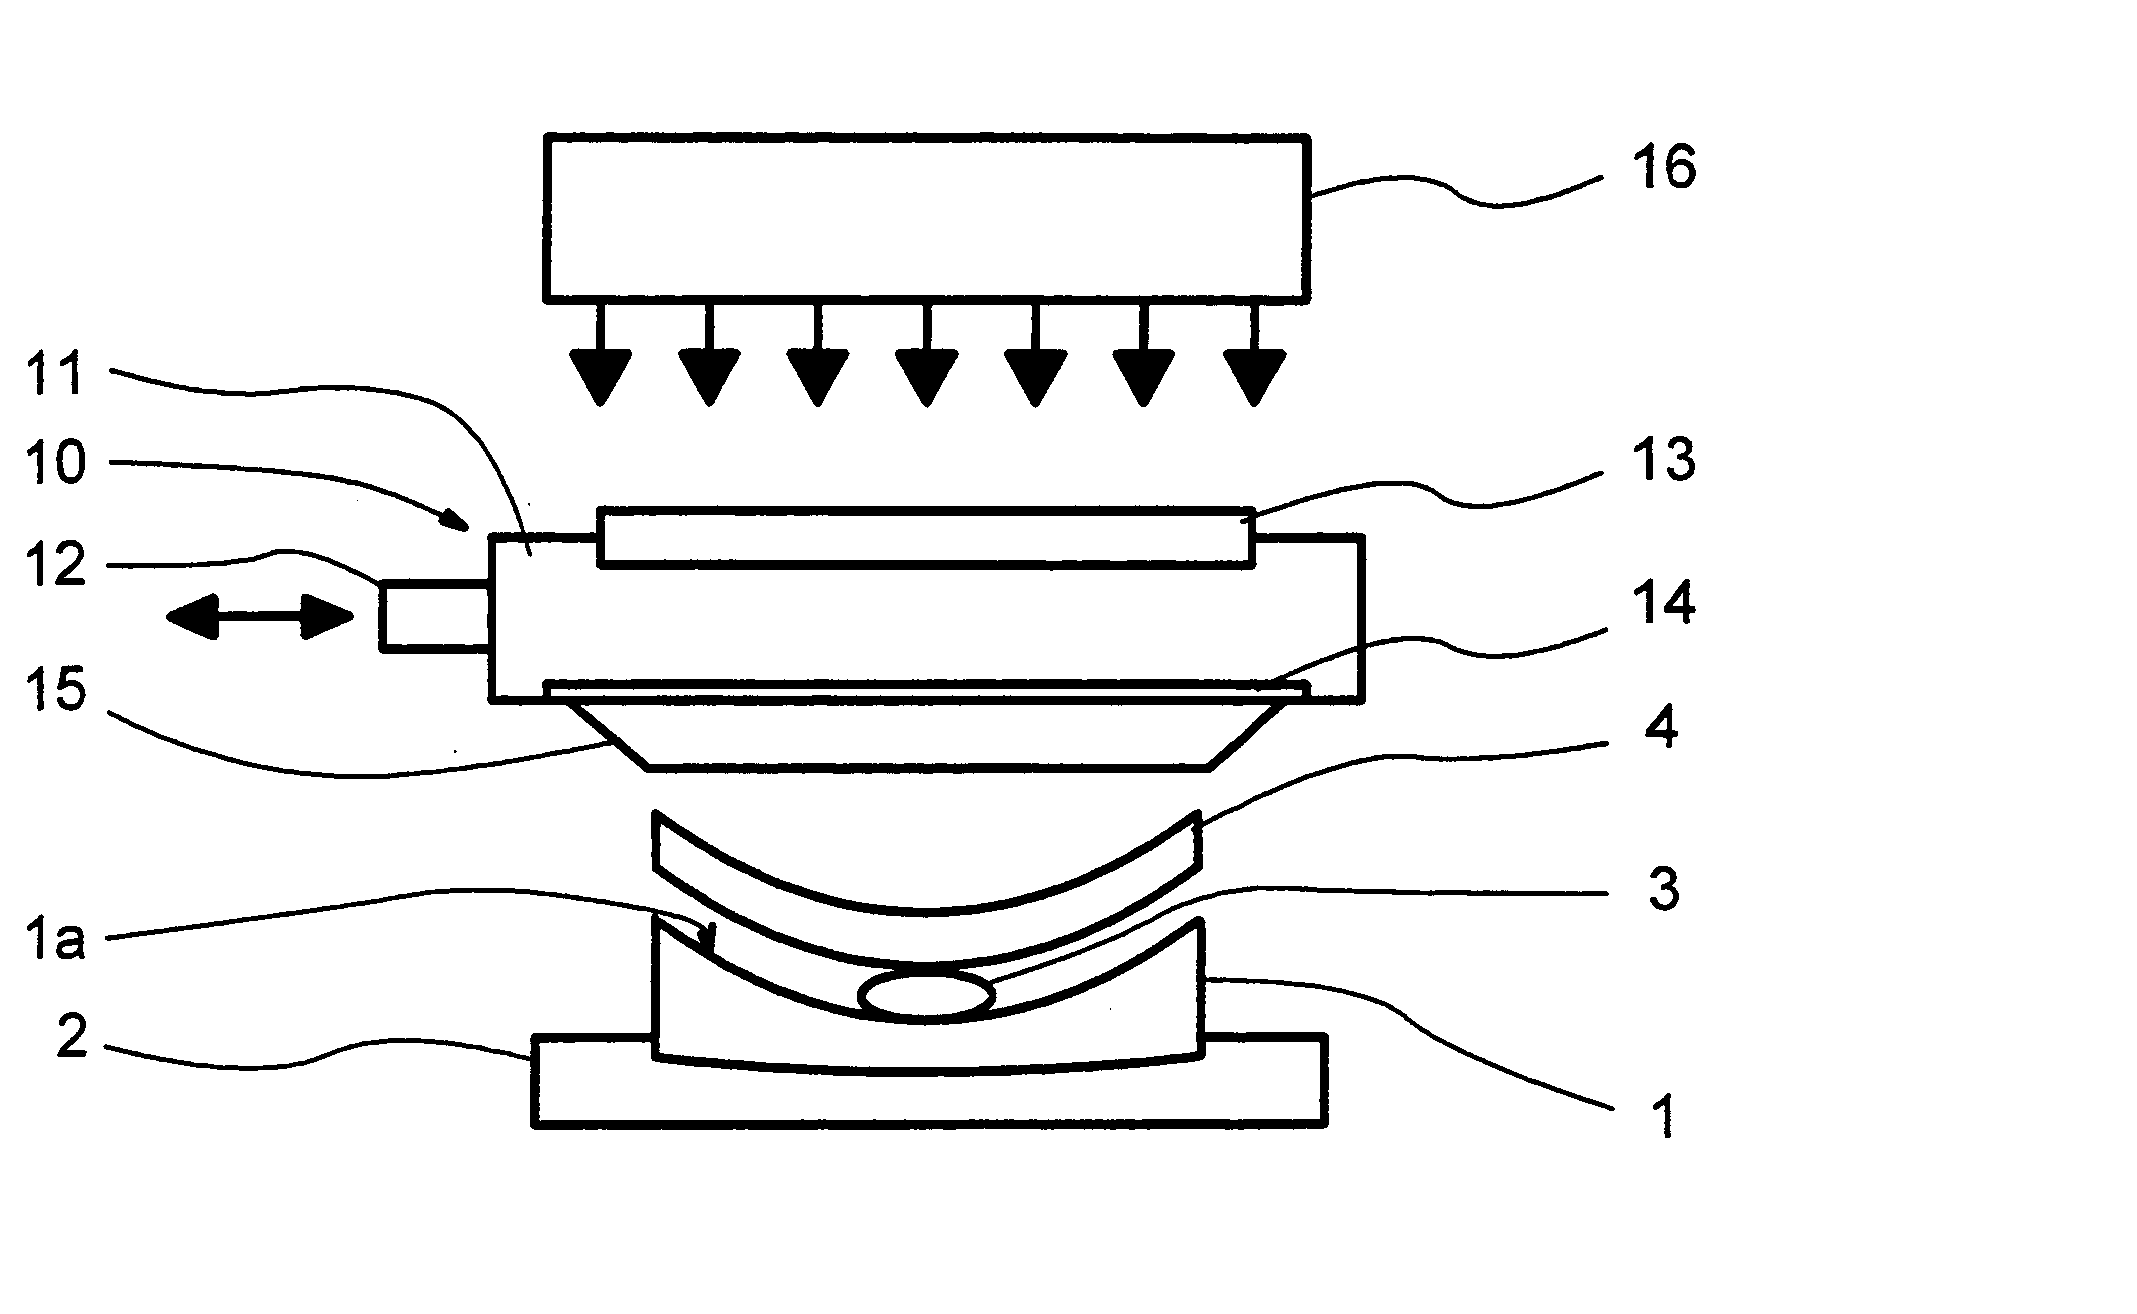 Process for making a coated optical article free of visible fining lines